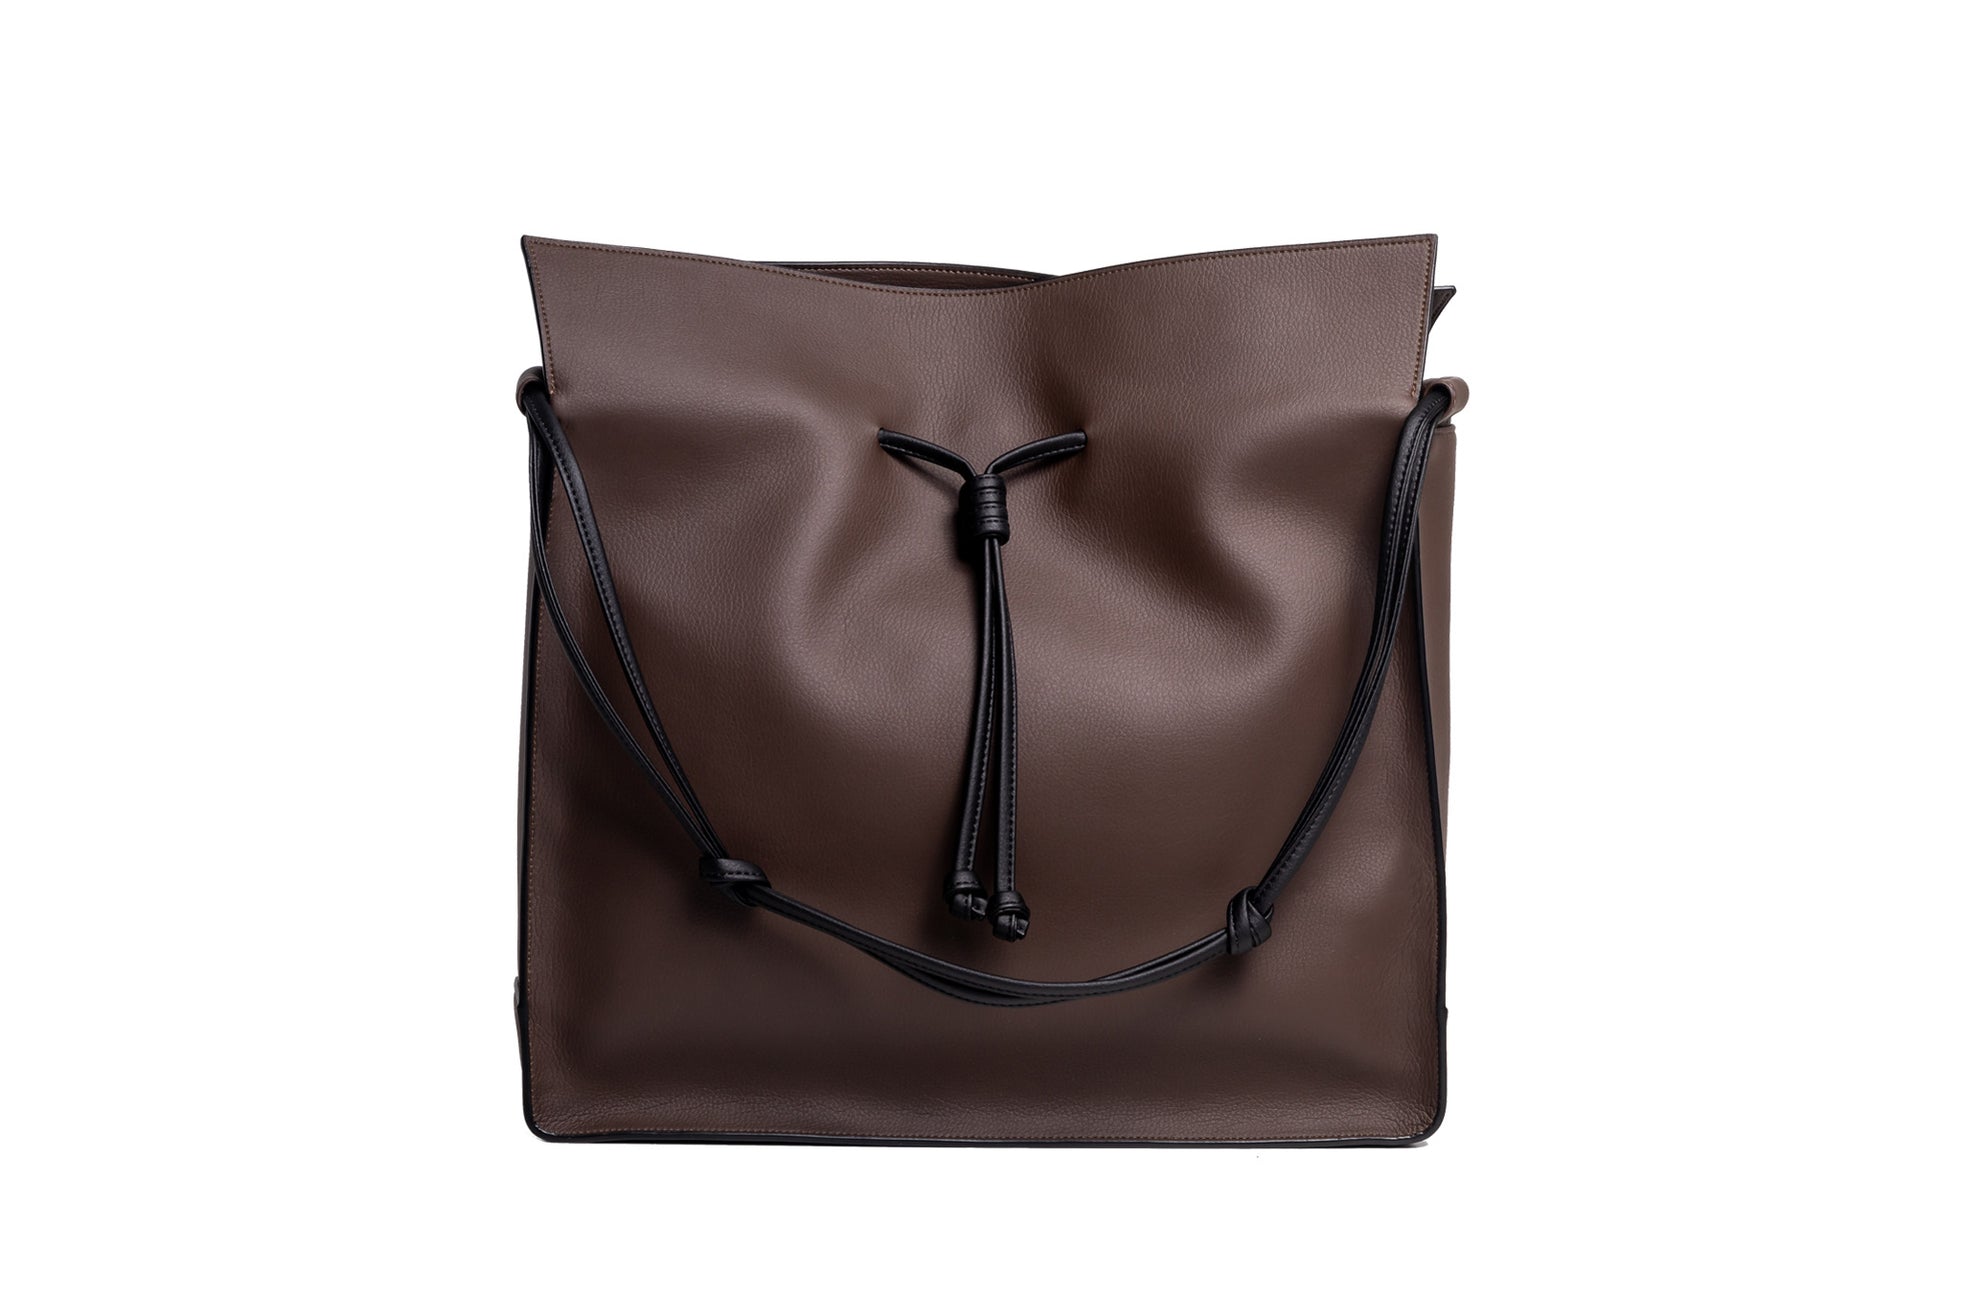 The Large Shopper in Technik-Leather in Taupe + Black image 1